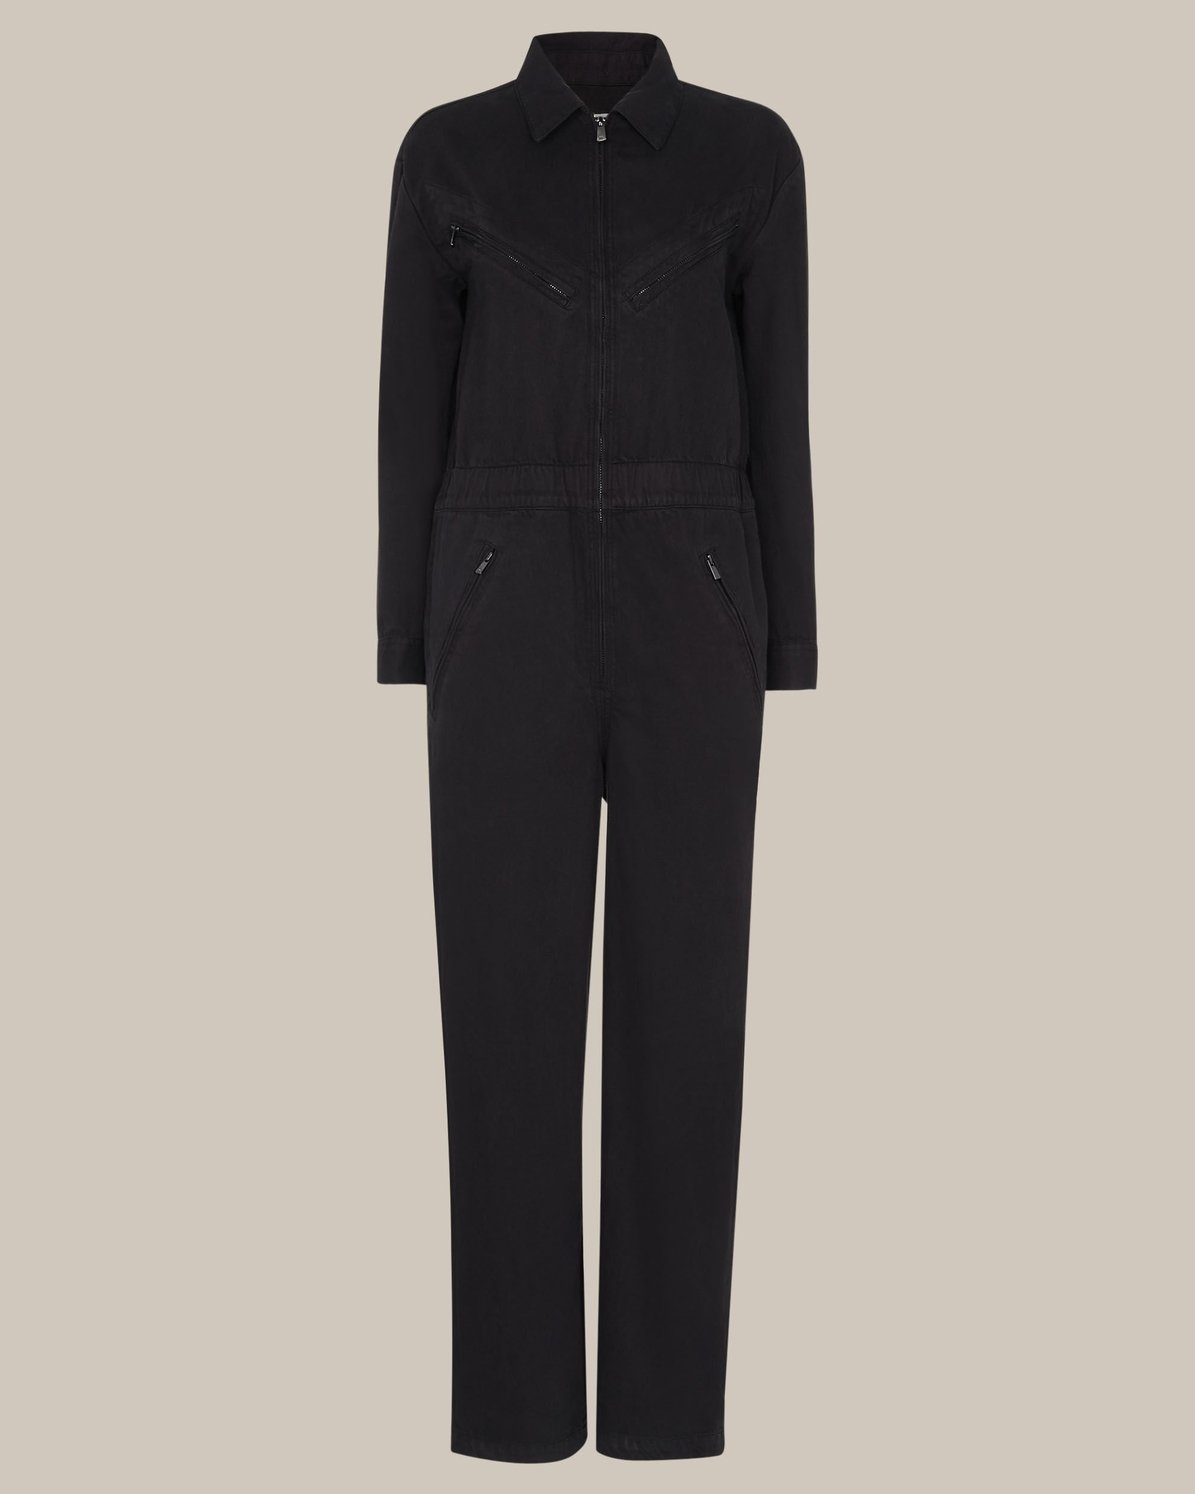 WHISTLES Ultimate Utility Jumpsuit in Black | Endource